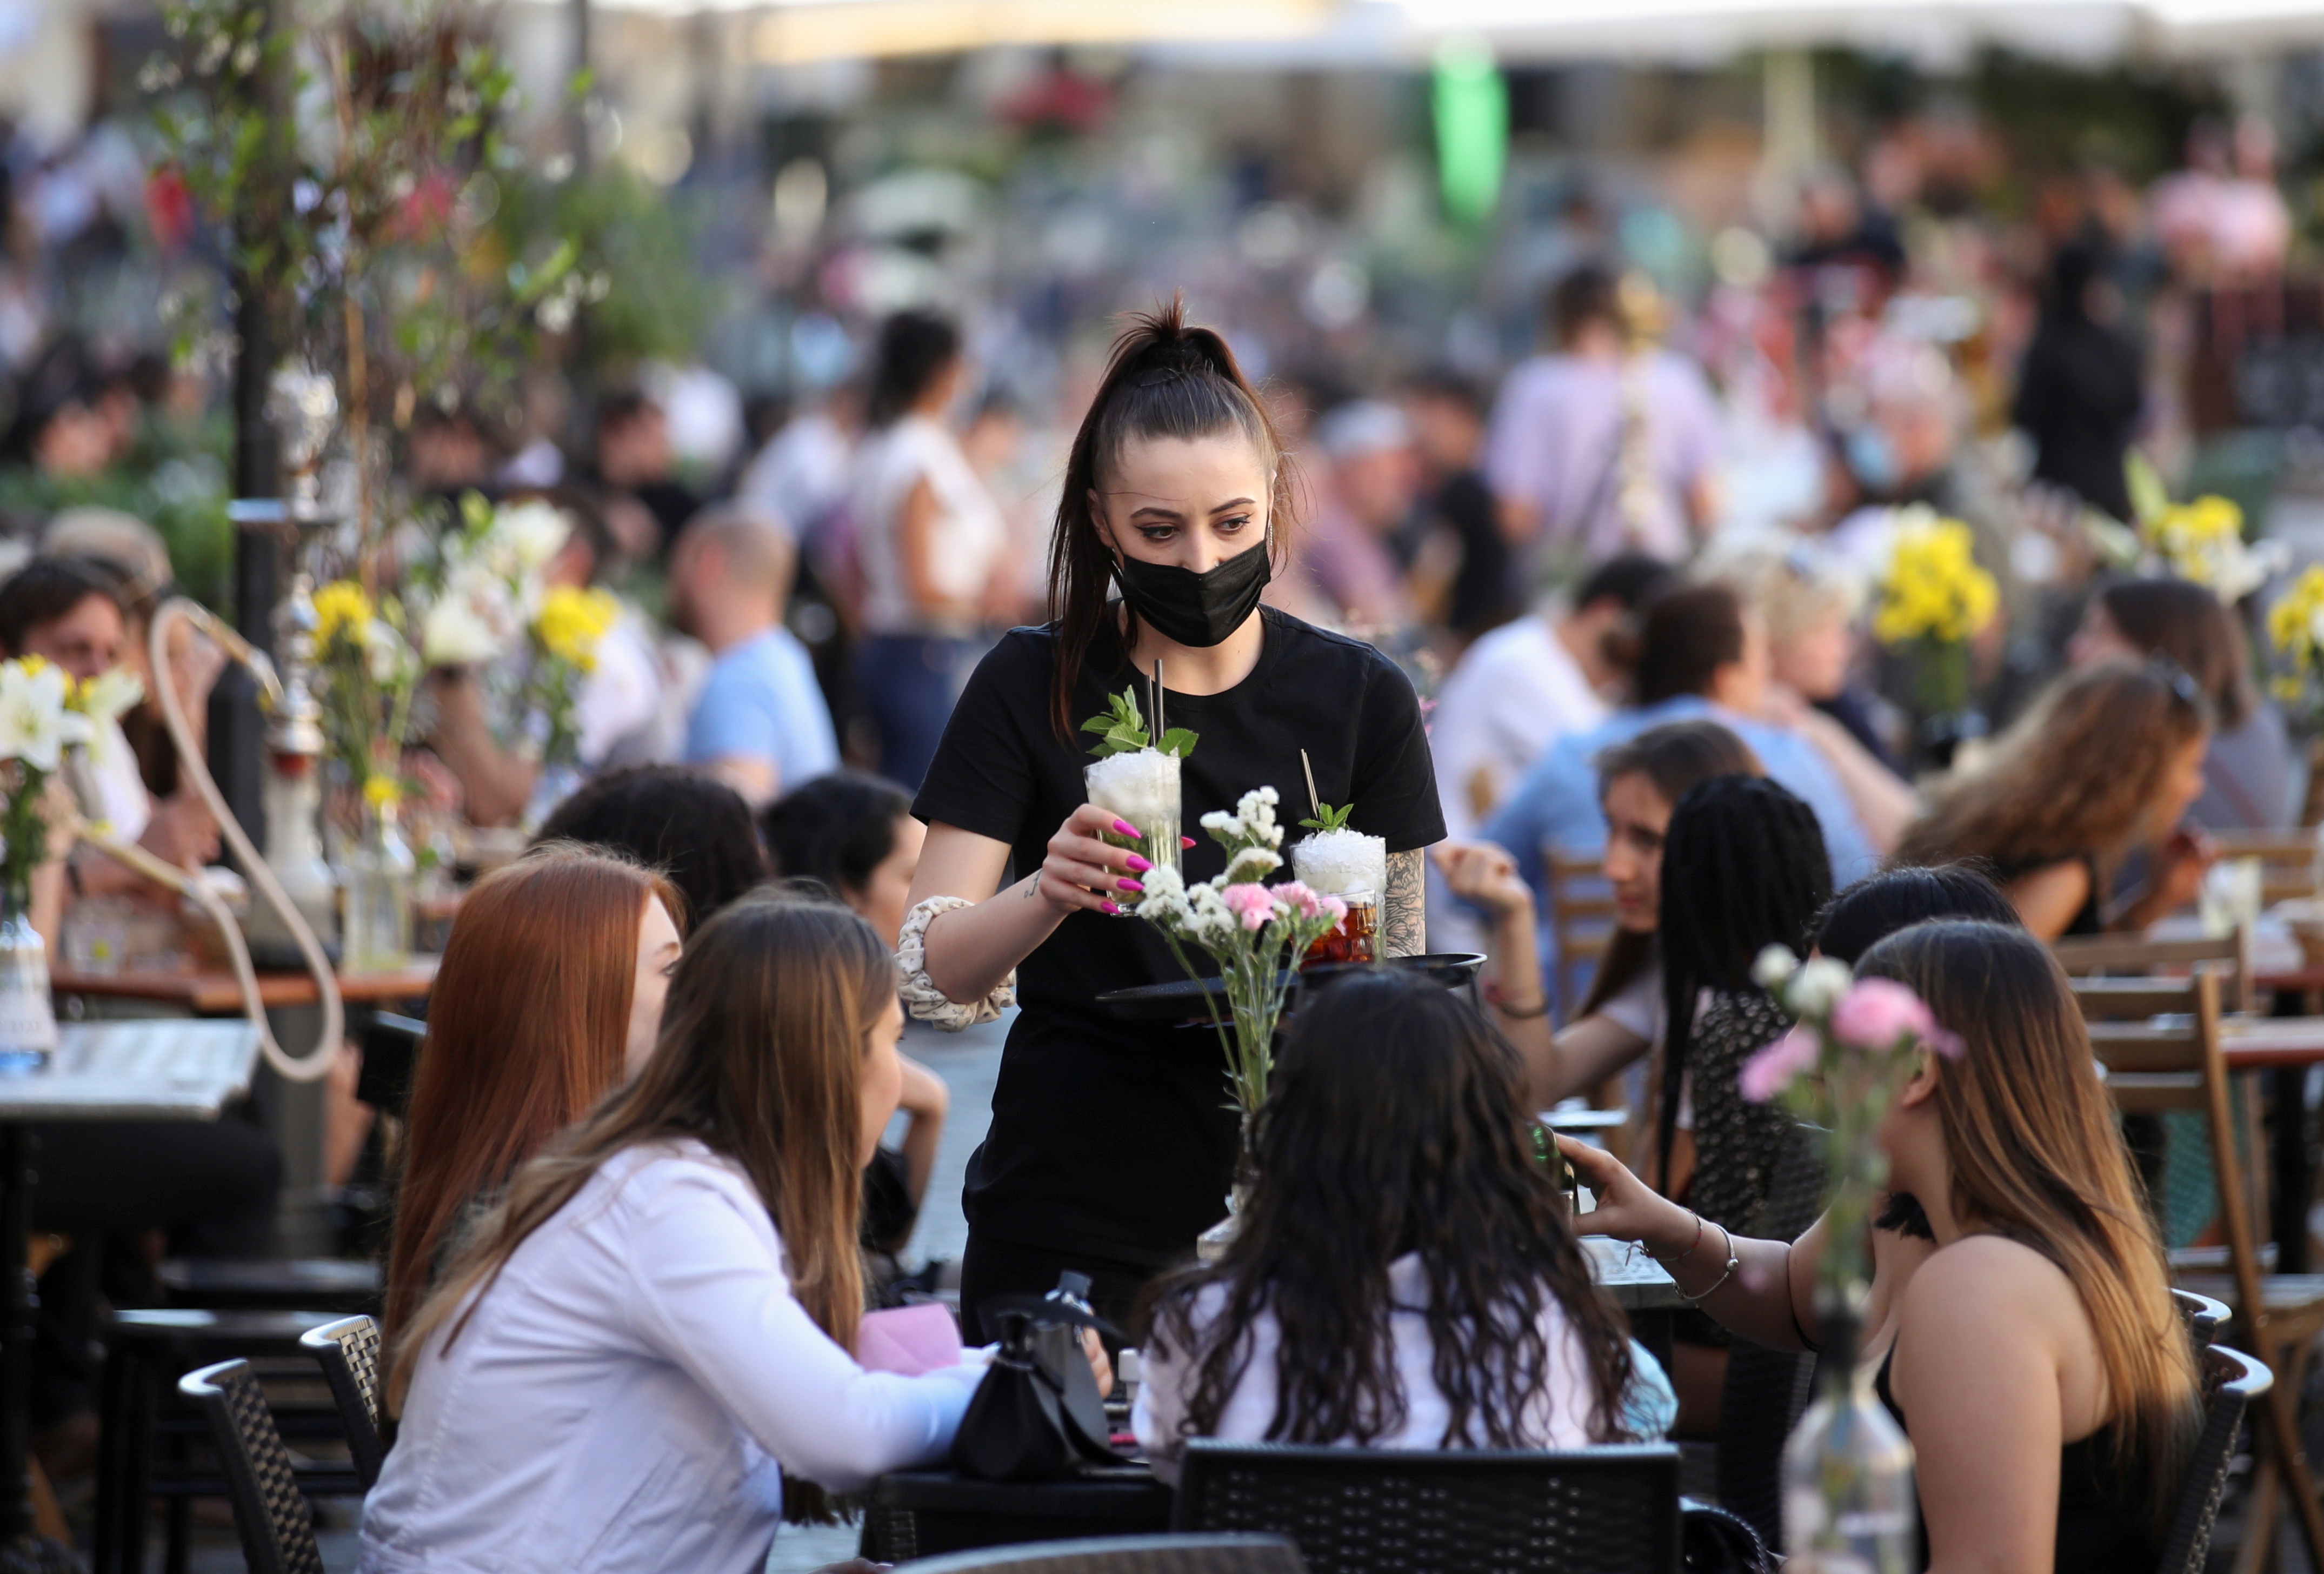 A waiter serves drinks to customers at a restaurant in Campo de' Fiori, in Rome